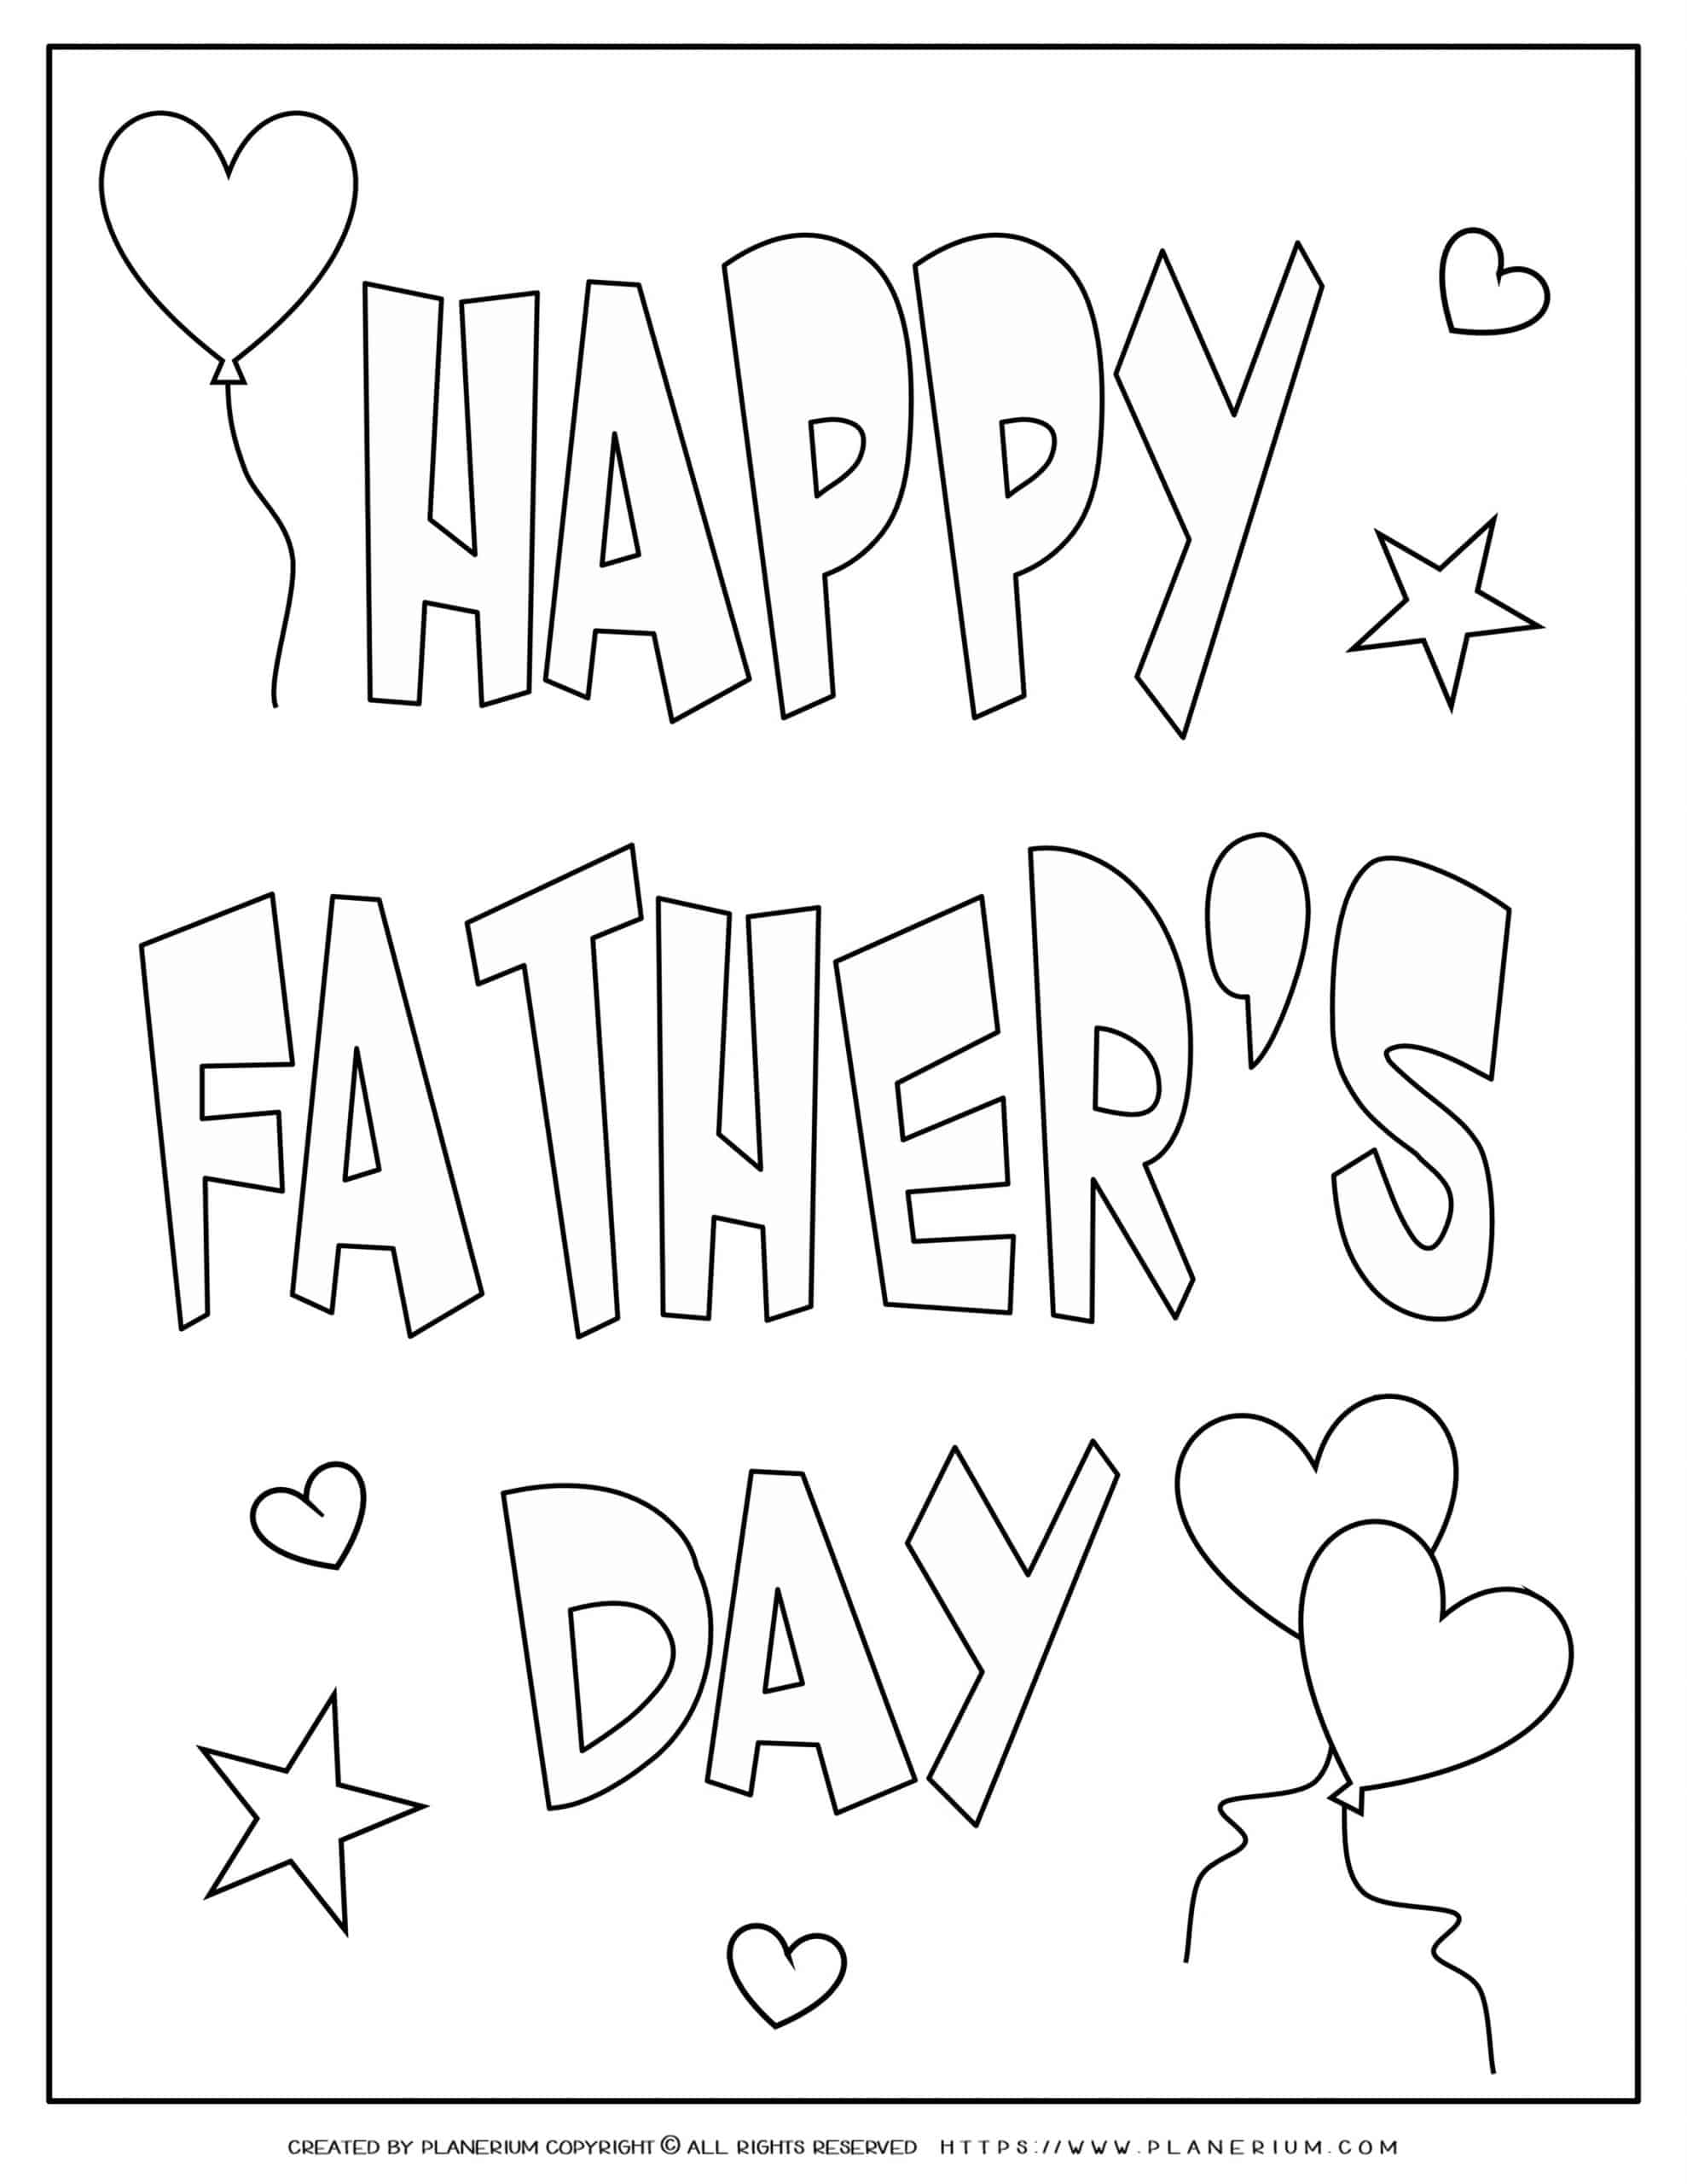 papa-printable-father-s-day-pinterest-surprise-ideas-diy-things